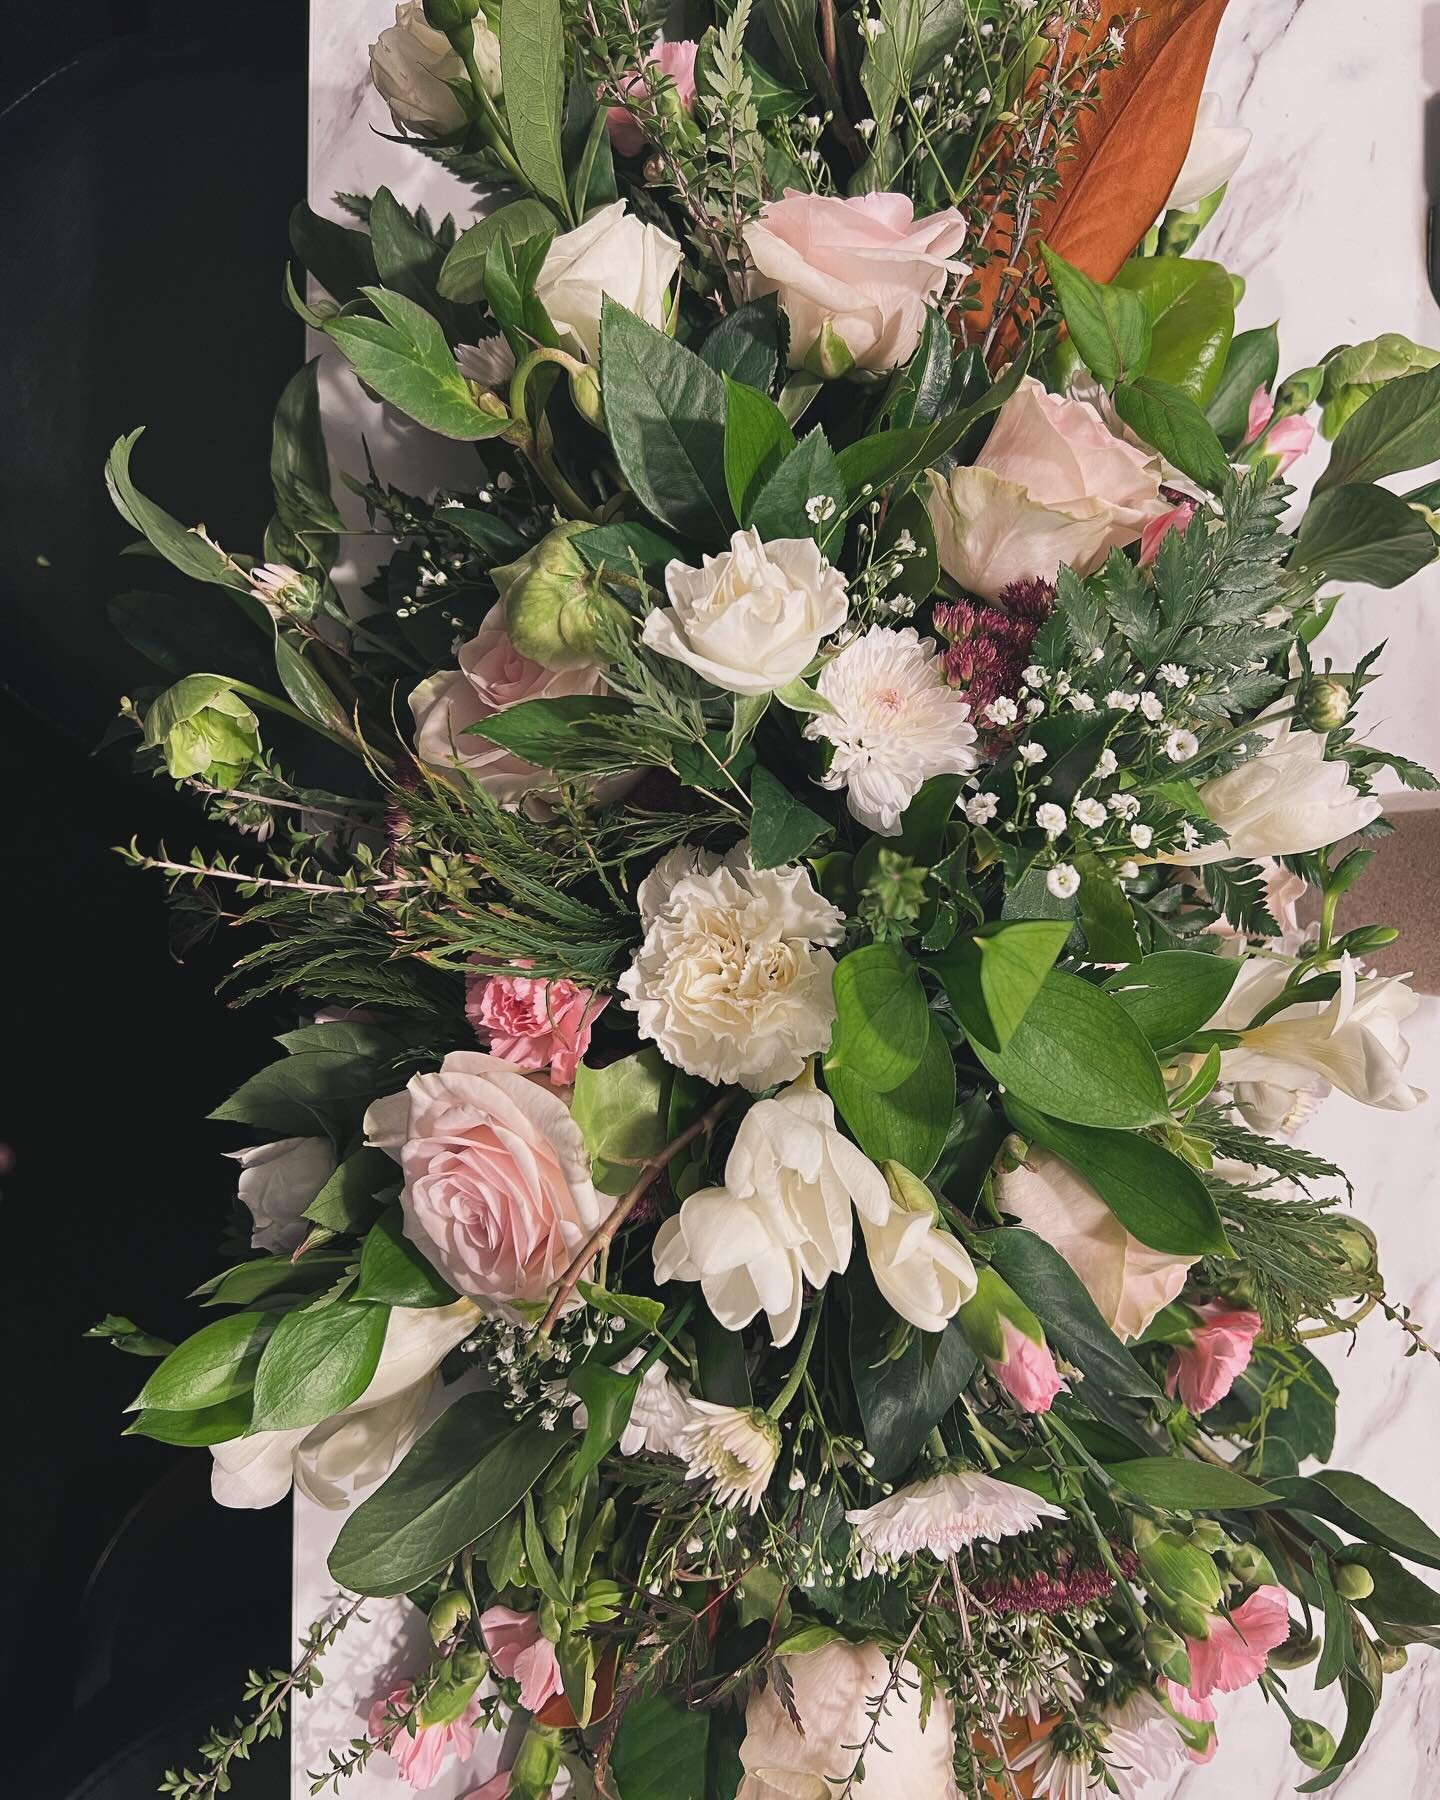 One of the many highlights of my mahi is getting to see all the beautiful floral arrangements. This arrangement was designed for me by @floristvictoria especially for my engagement party 🌷🌺💐

#flowers #floralarrangement #weddingflowers #flowerlove